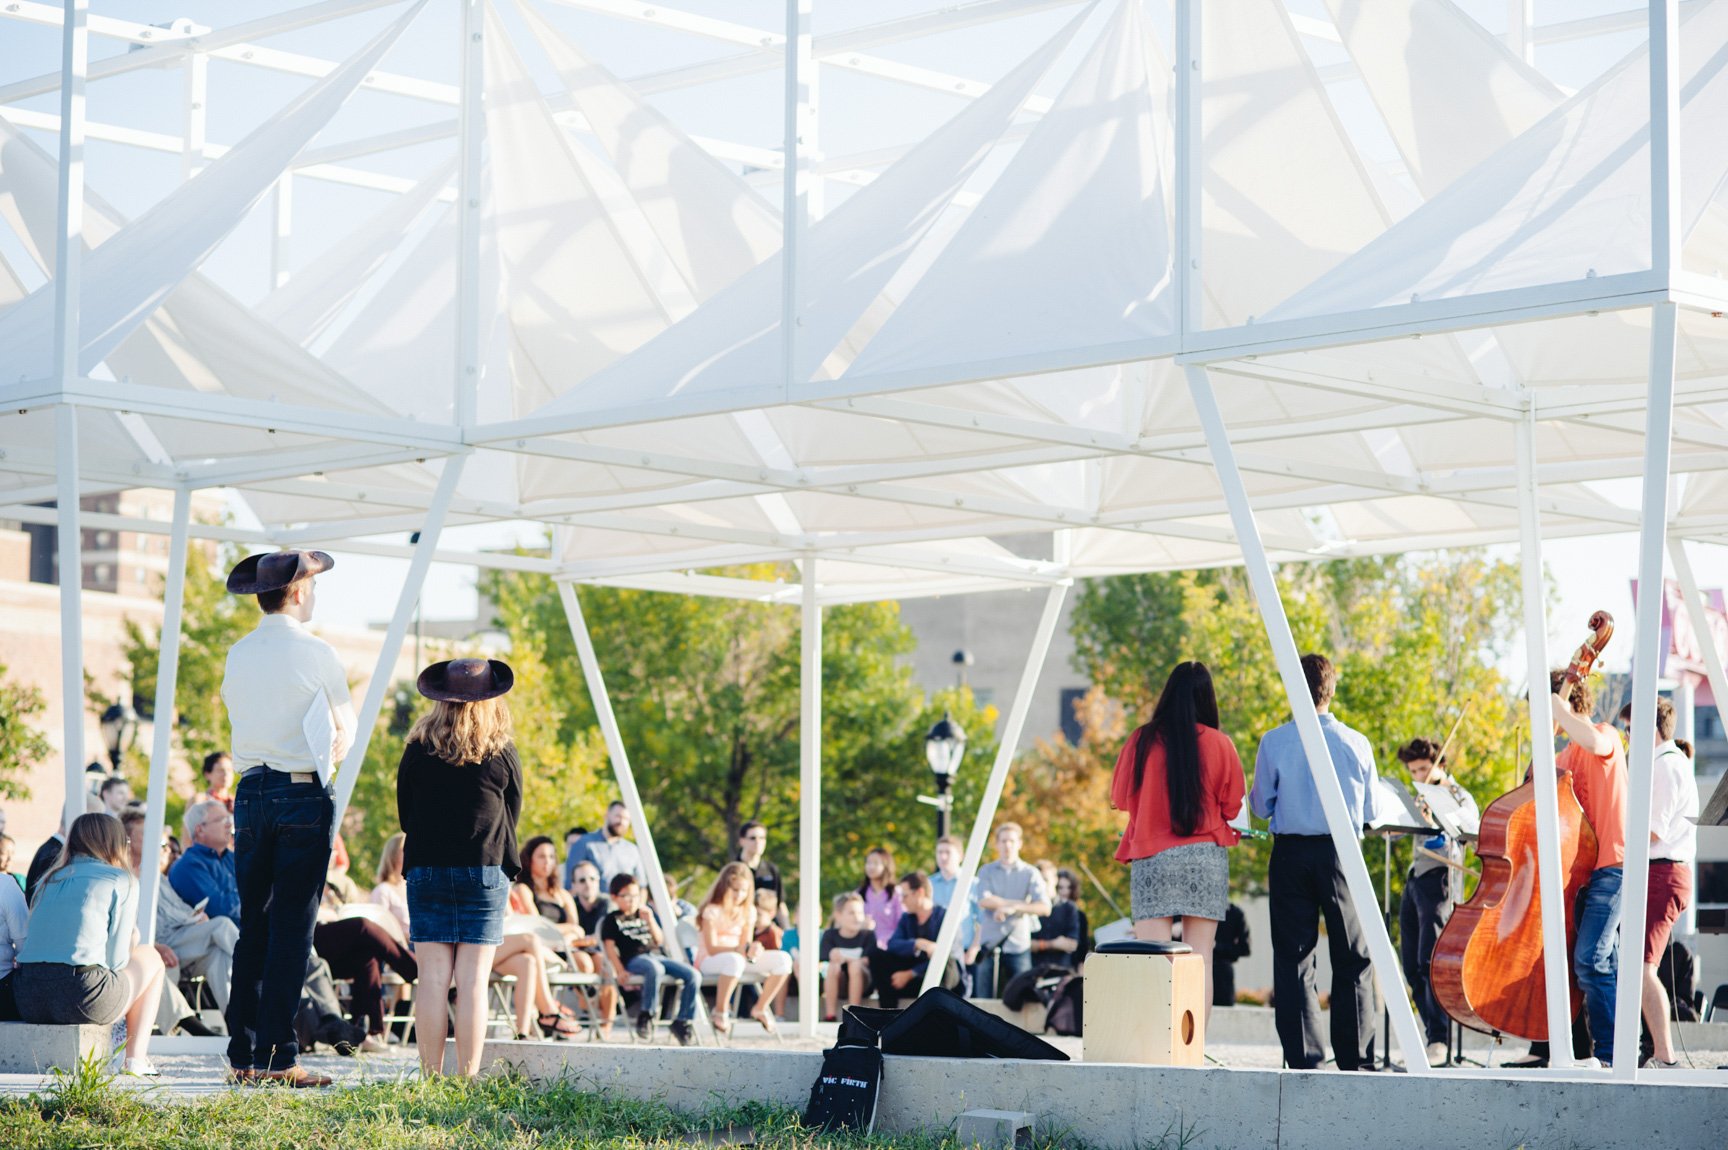 Student musicians perform outdoors under a white geometric installation for an audience.